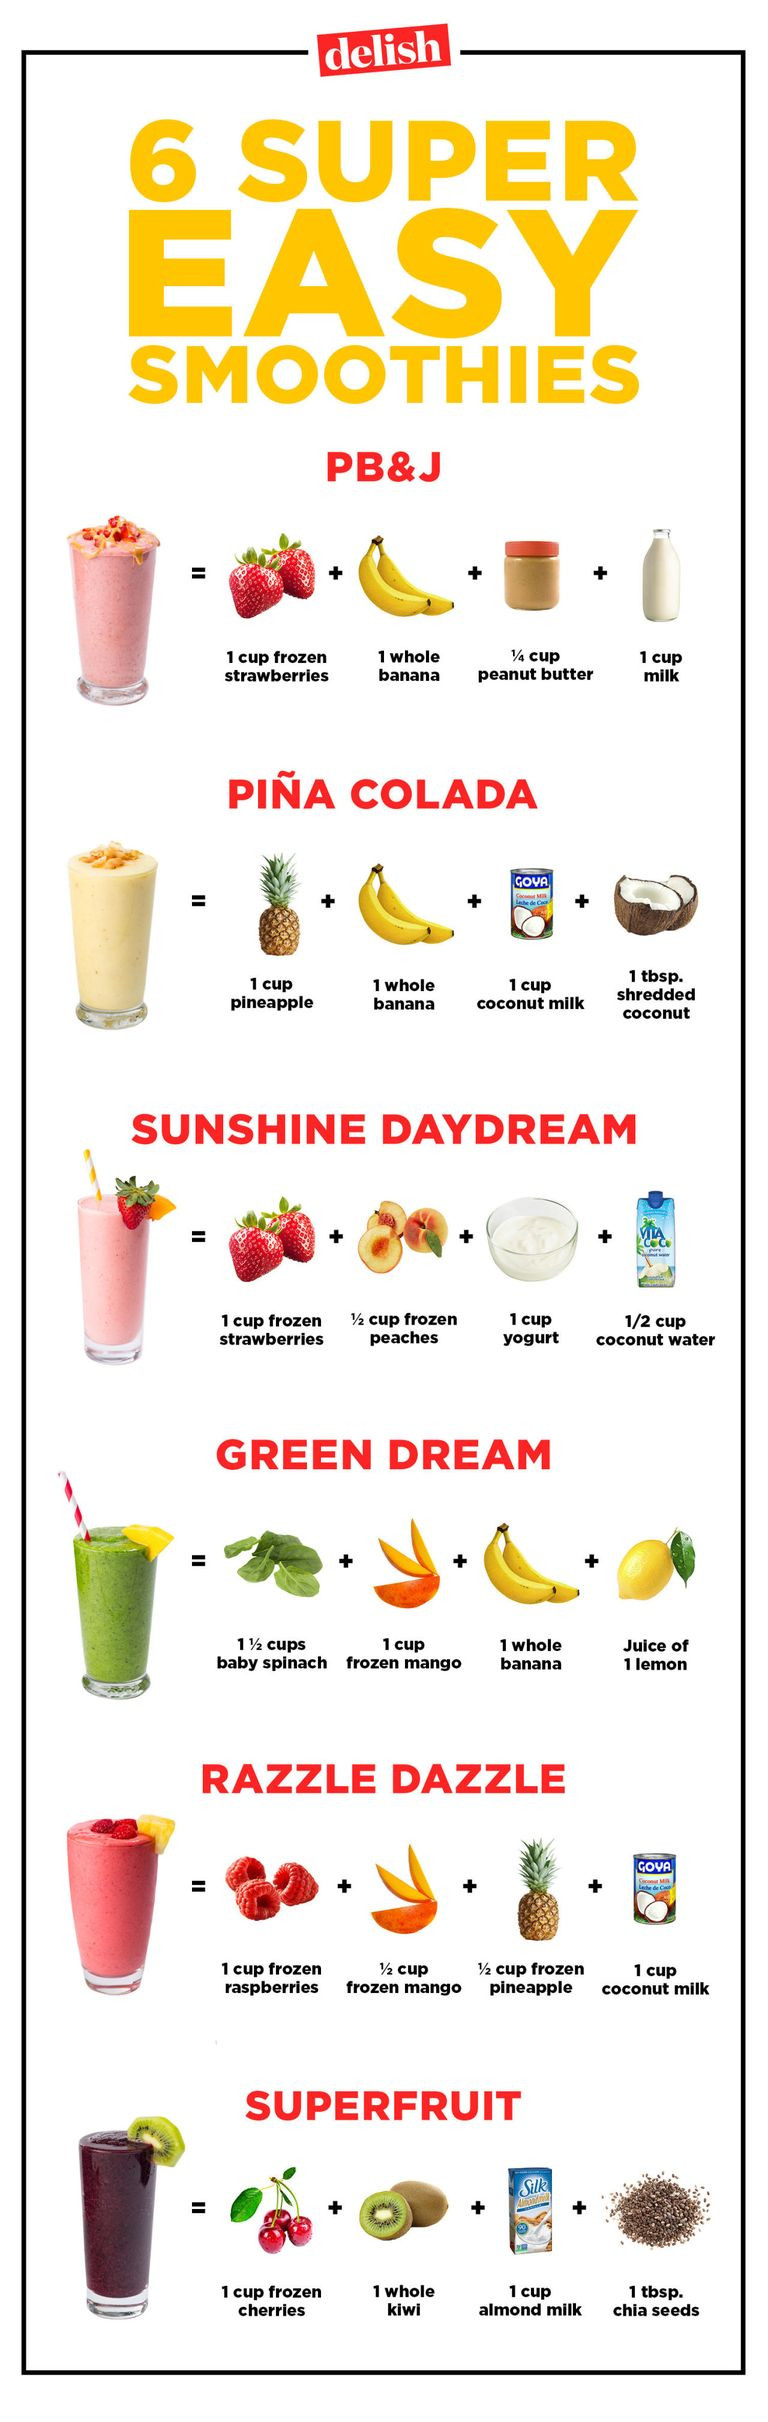 Delicious Smoothie Recipes
 20 Healthy Fruit Smoothie Recipes How to Make Healthy